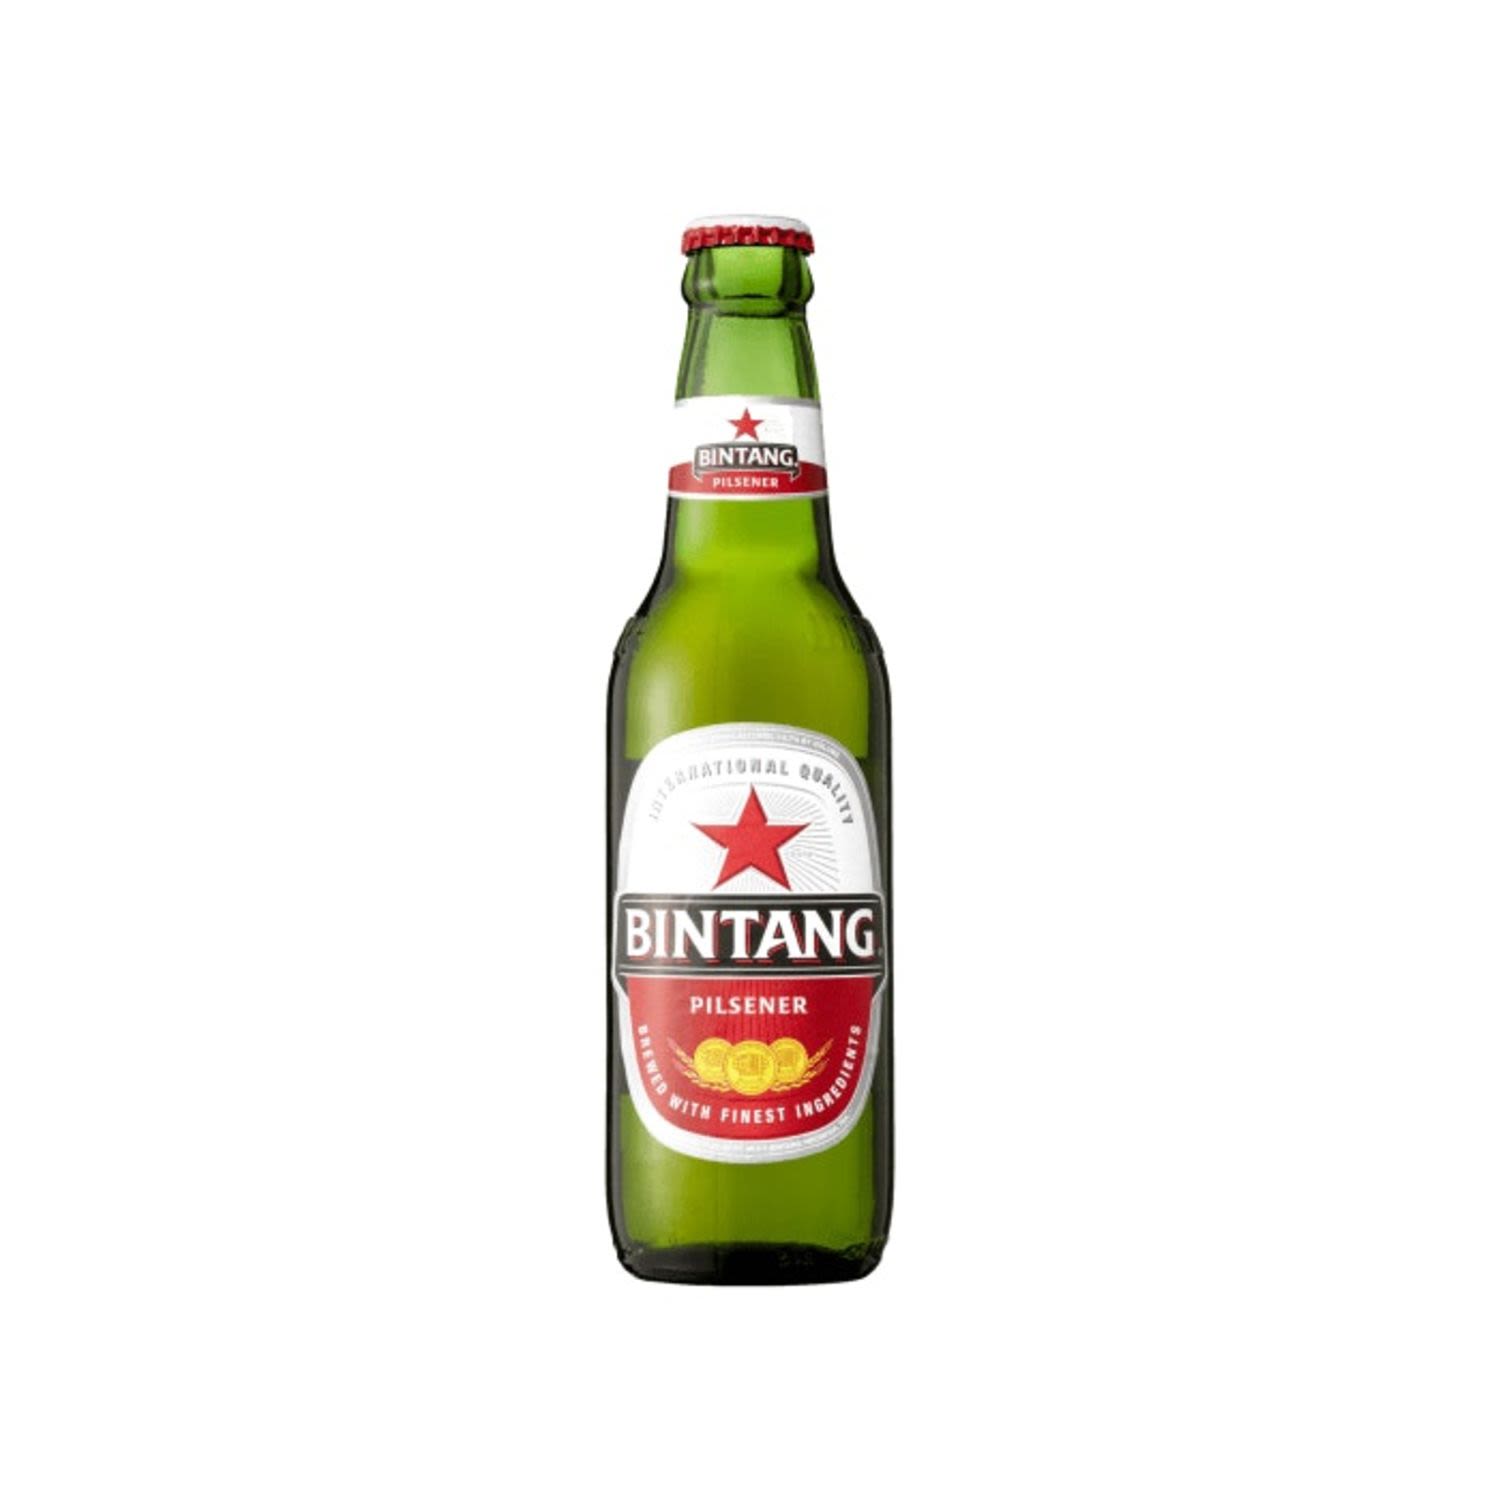 Every Australian who has set foot in Bali has had the crisp, clean and refreshing lager flavours of Bintang cross their lips. Relive those holiday memories with a Bintang today.<br /> <br />Alcohol Volume: 4.70%<br /><br />Pack Format: Bottle<br /><br />Standard Drinks: 1.3</br /><br />Pack Type: Bottle<br /><br />Country of Origin: Indonesia<br />